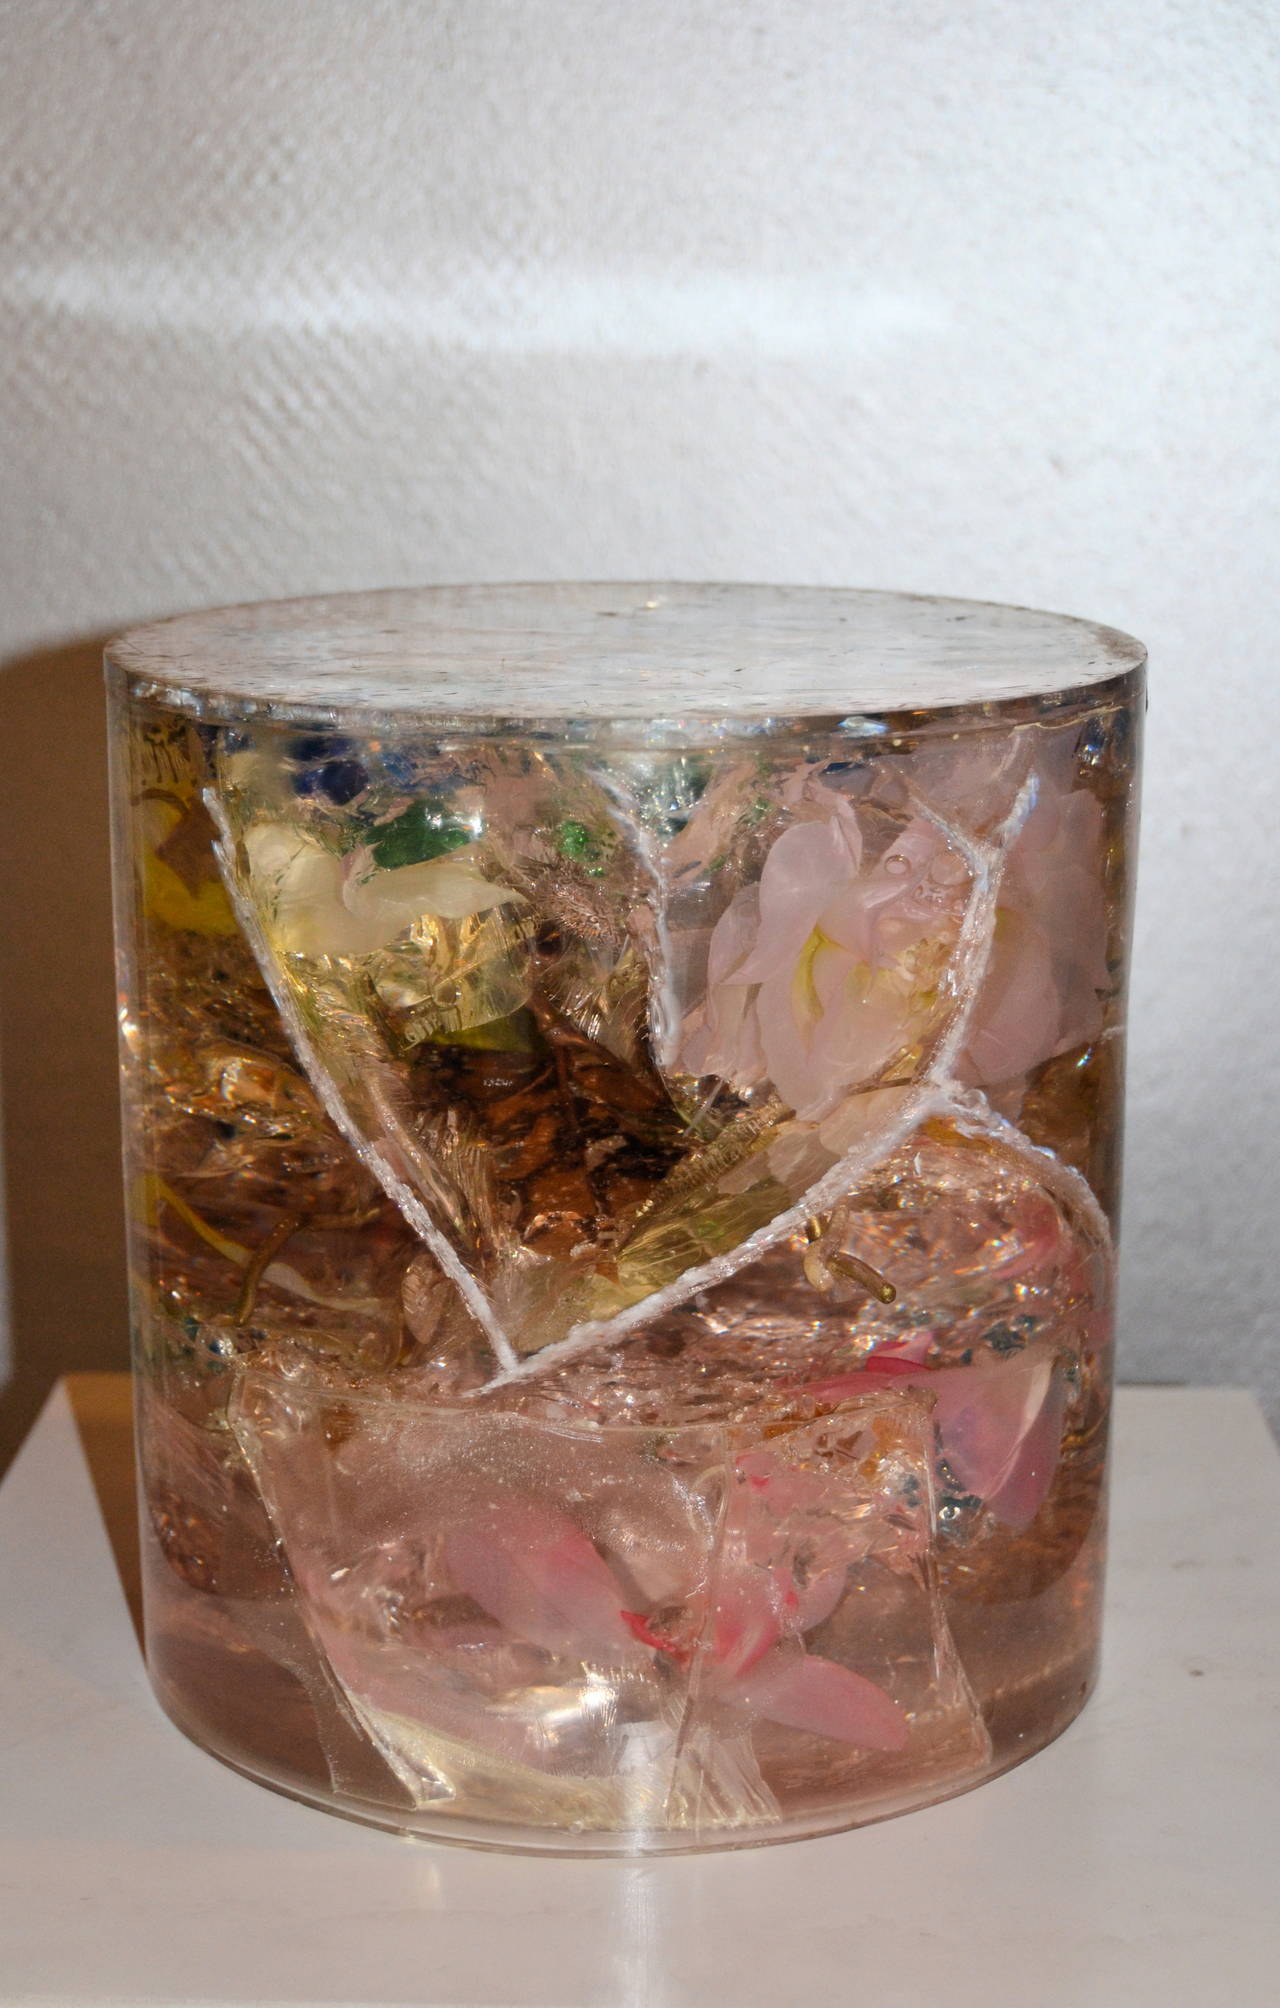 1970s fractal resin with flowers and glass inclusion for this decorative object.